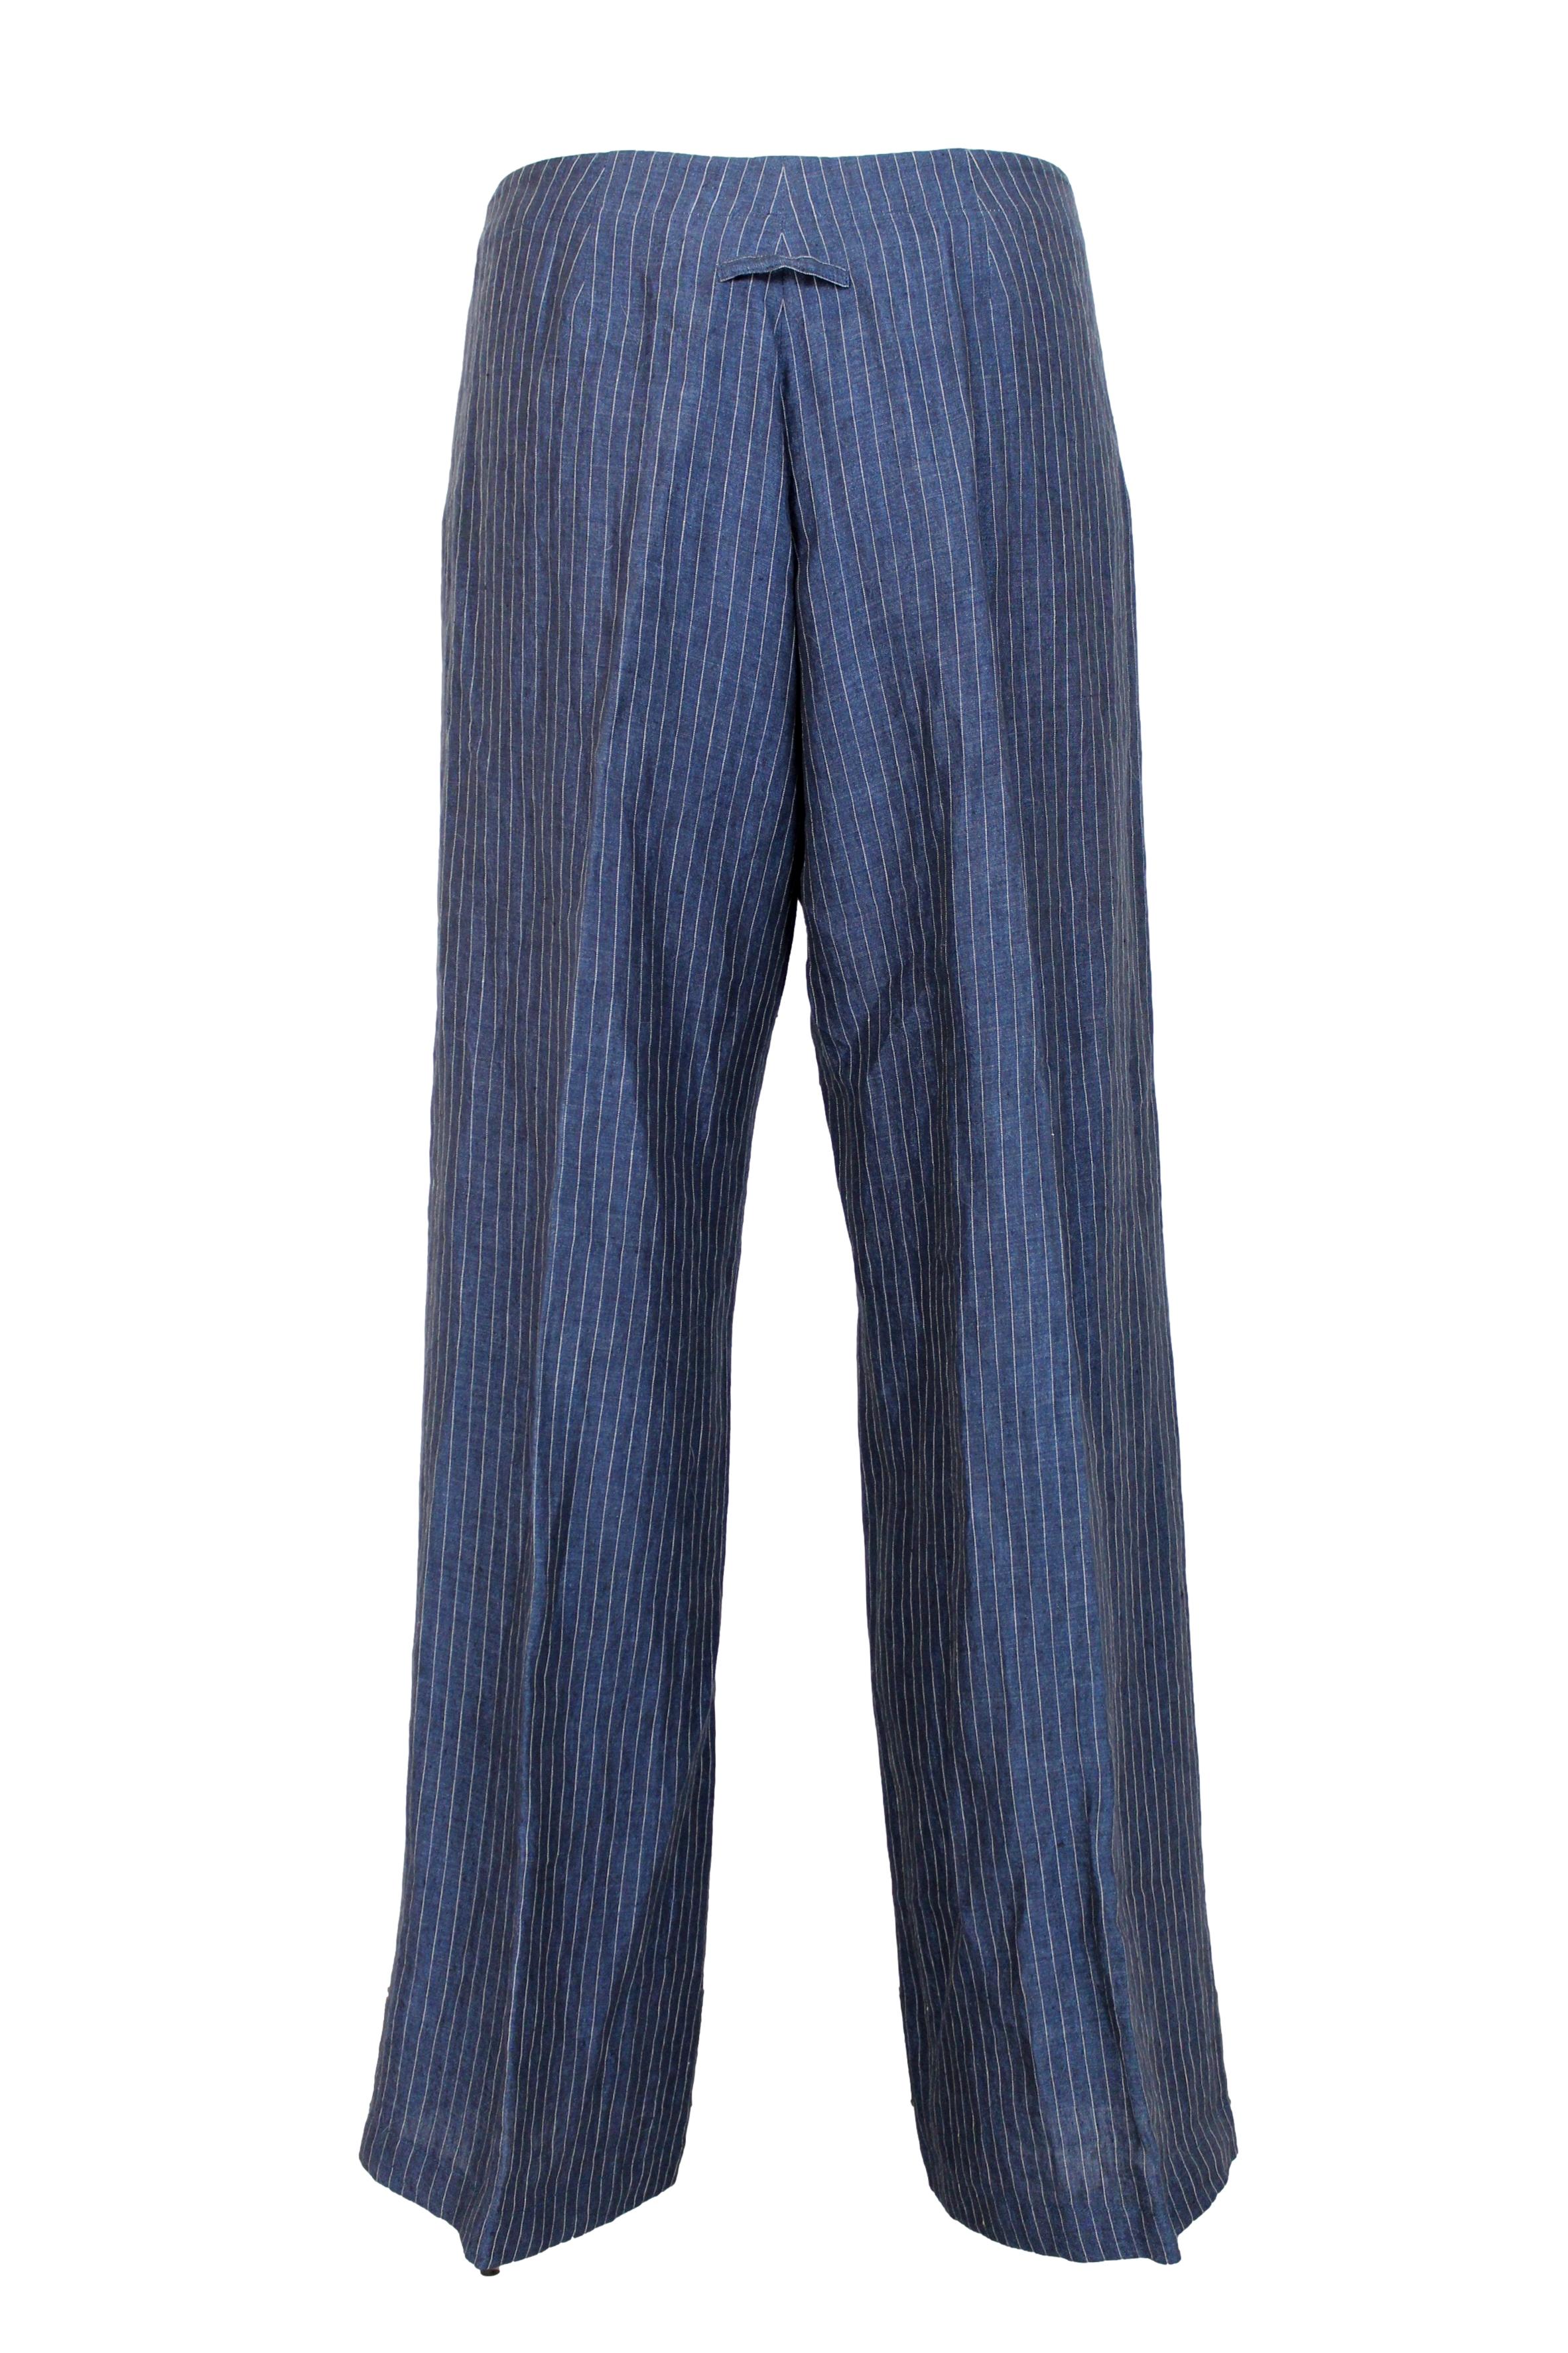 Jean Paul Gaultier Femme 90s vintage women's trousers. High-waisted trousers, closure with clip buttons at the waist. Wide leg, blue with gray stripes. 100% linen fabric. Made in Italy.

Condition: Excellent

Article used few times, it remains in